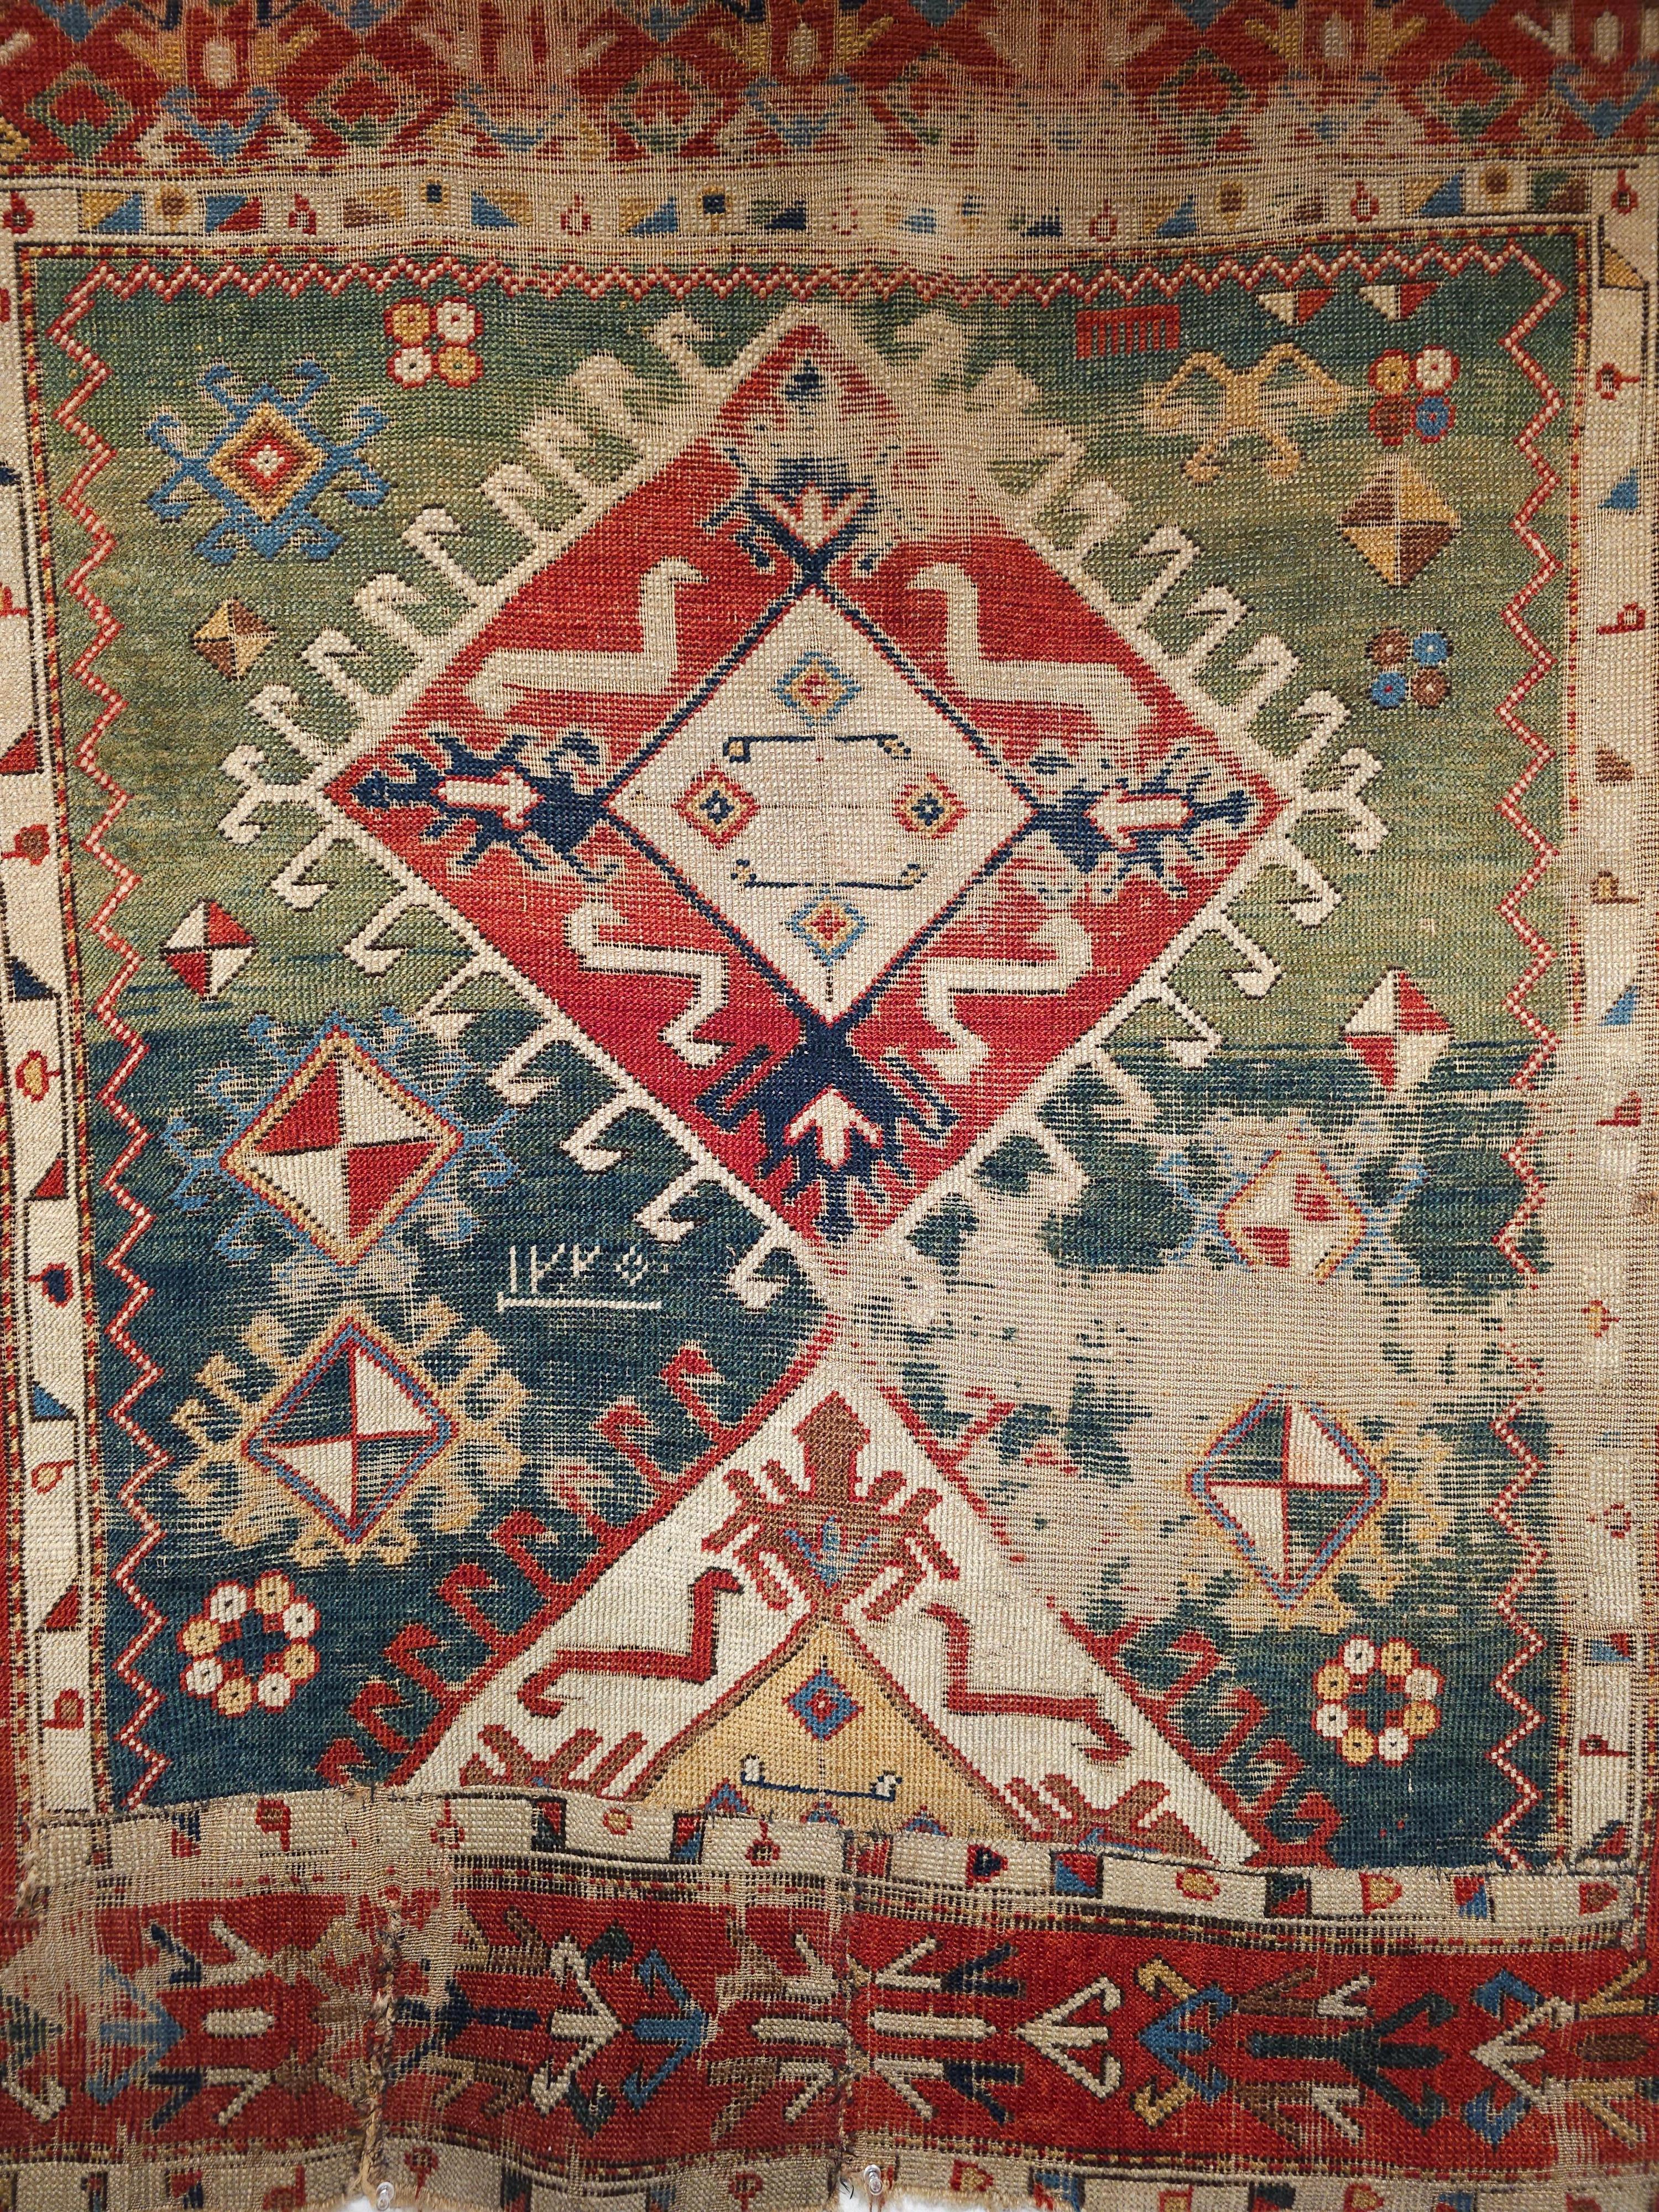 Early 1800s Square Size Caucasian Shirvan Rug in Green, Yellow, Blue, Red, Ivory In Fair Condition For Sale In Barrington, IL